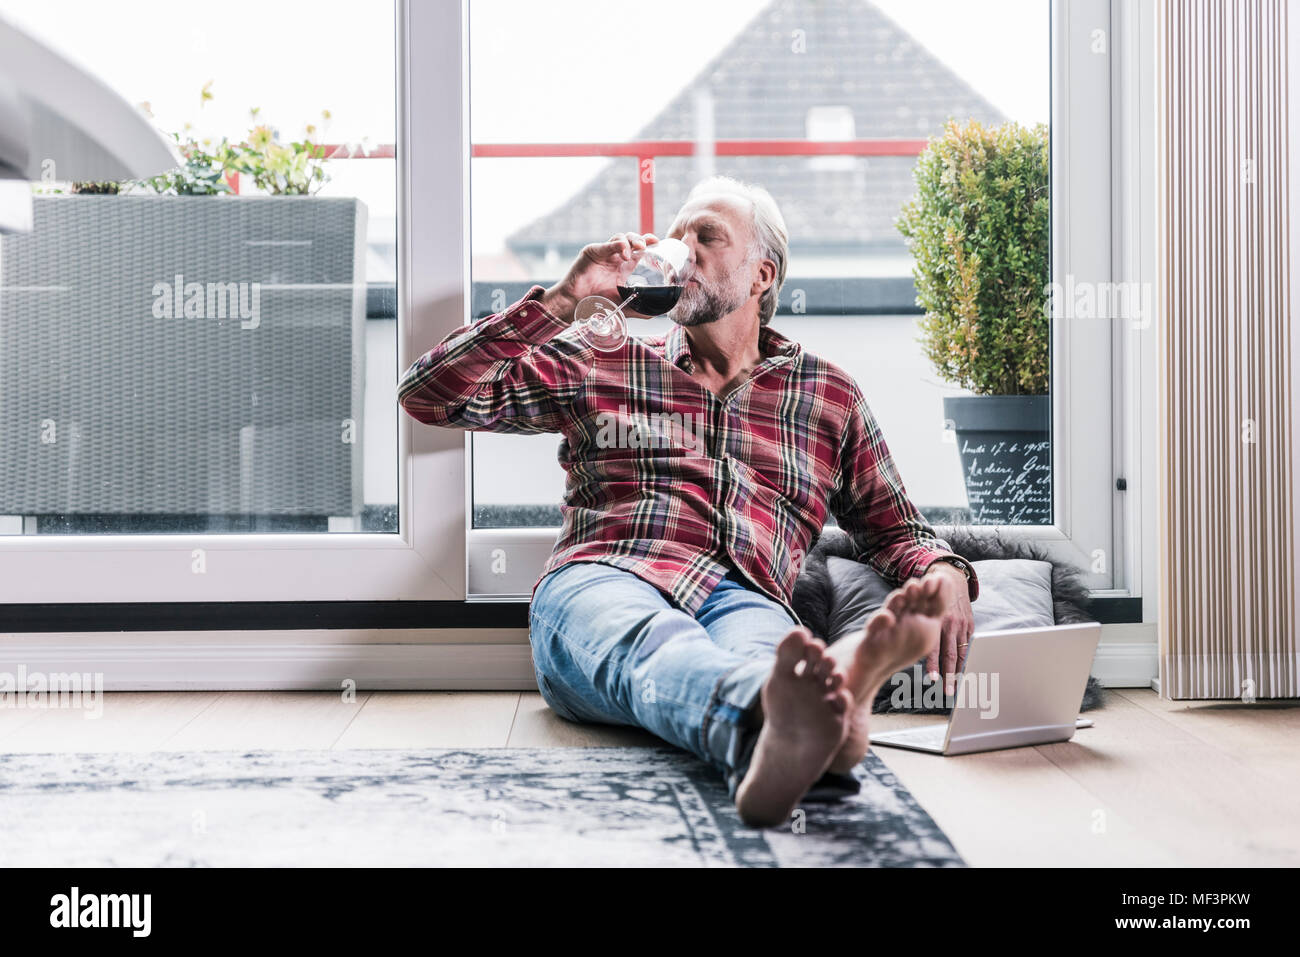 Barefoot man relaxing on the floor at home drinking glass of red wine Stock Photo